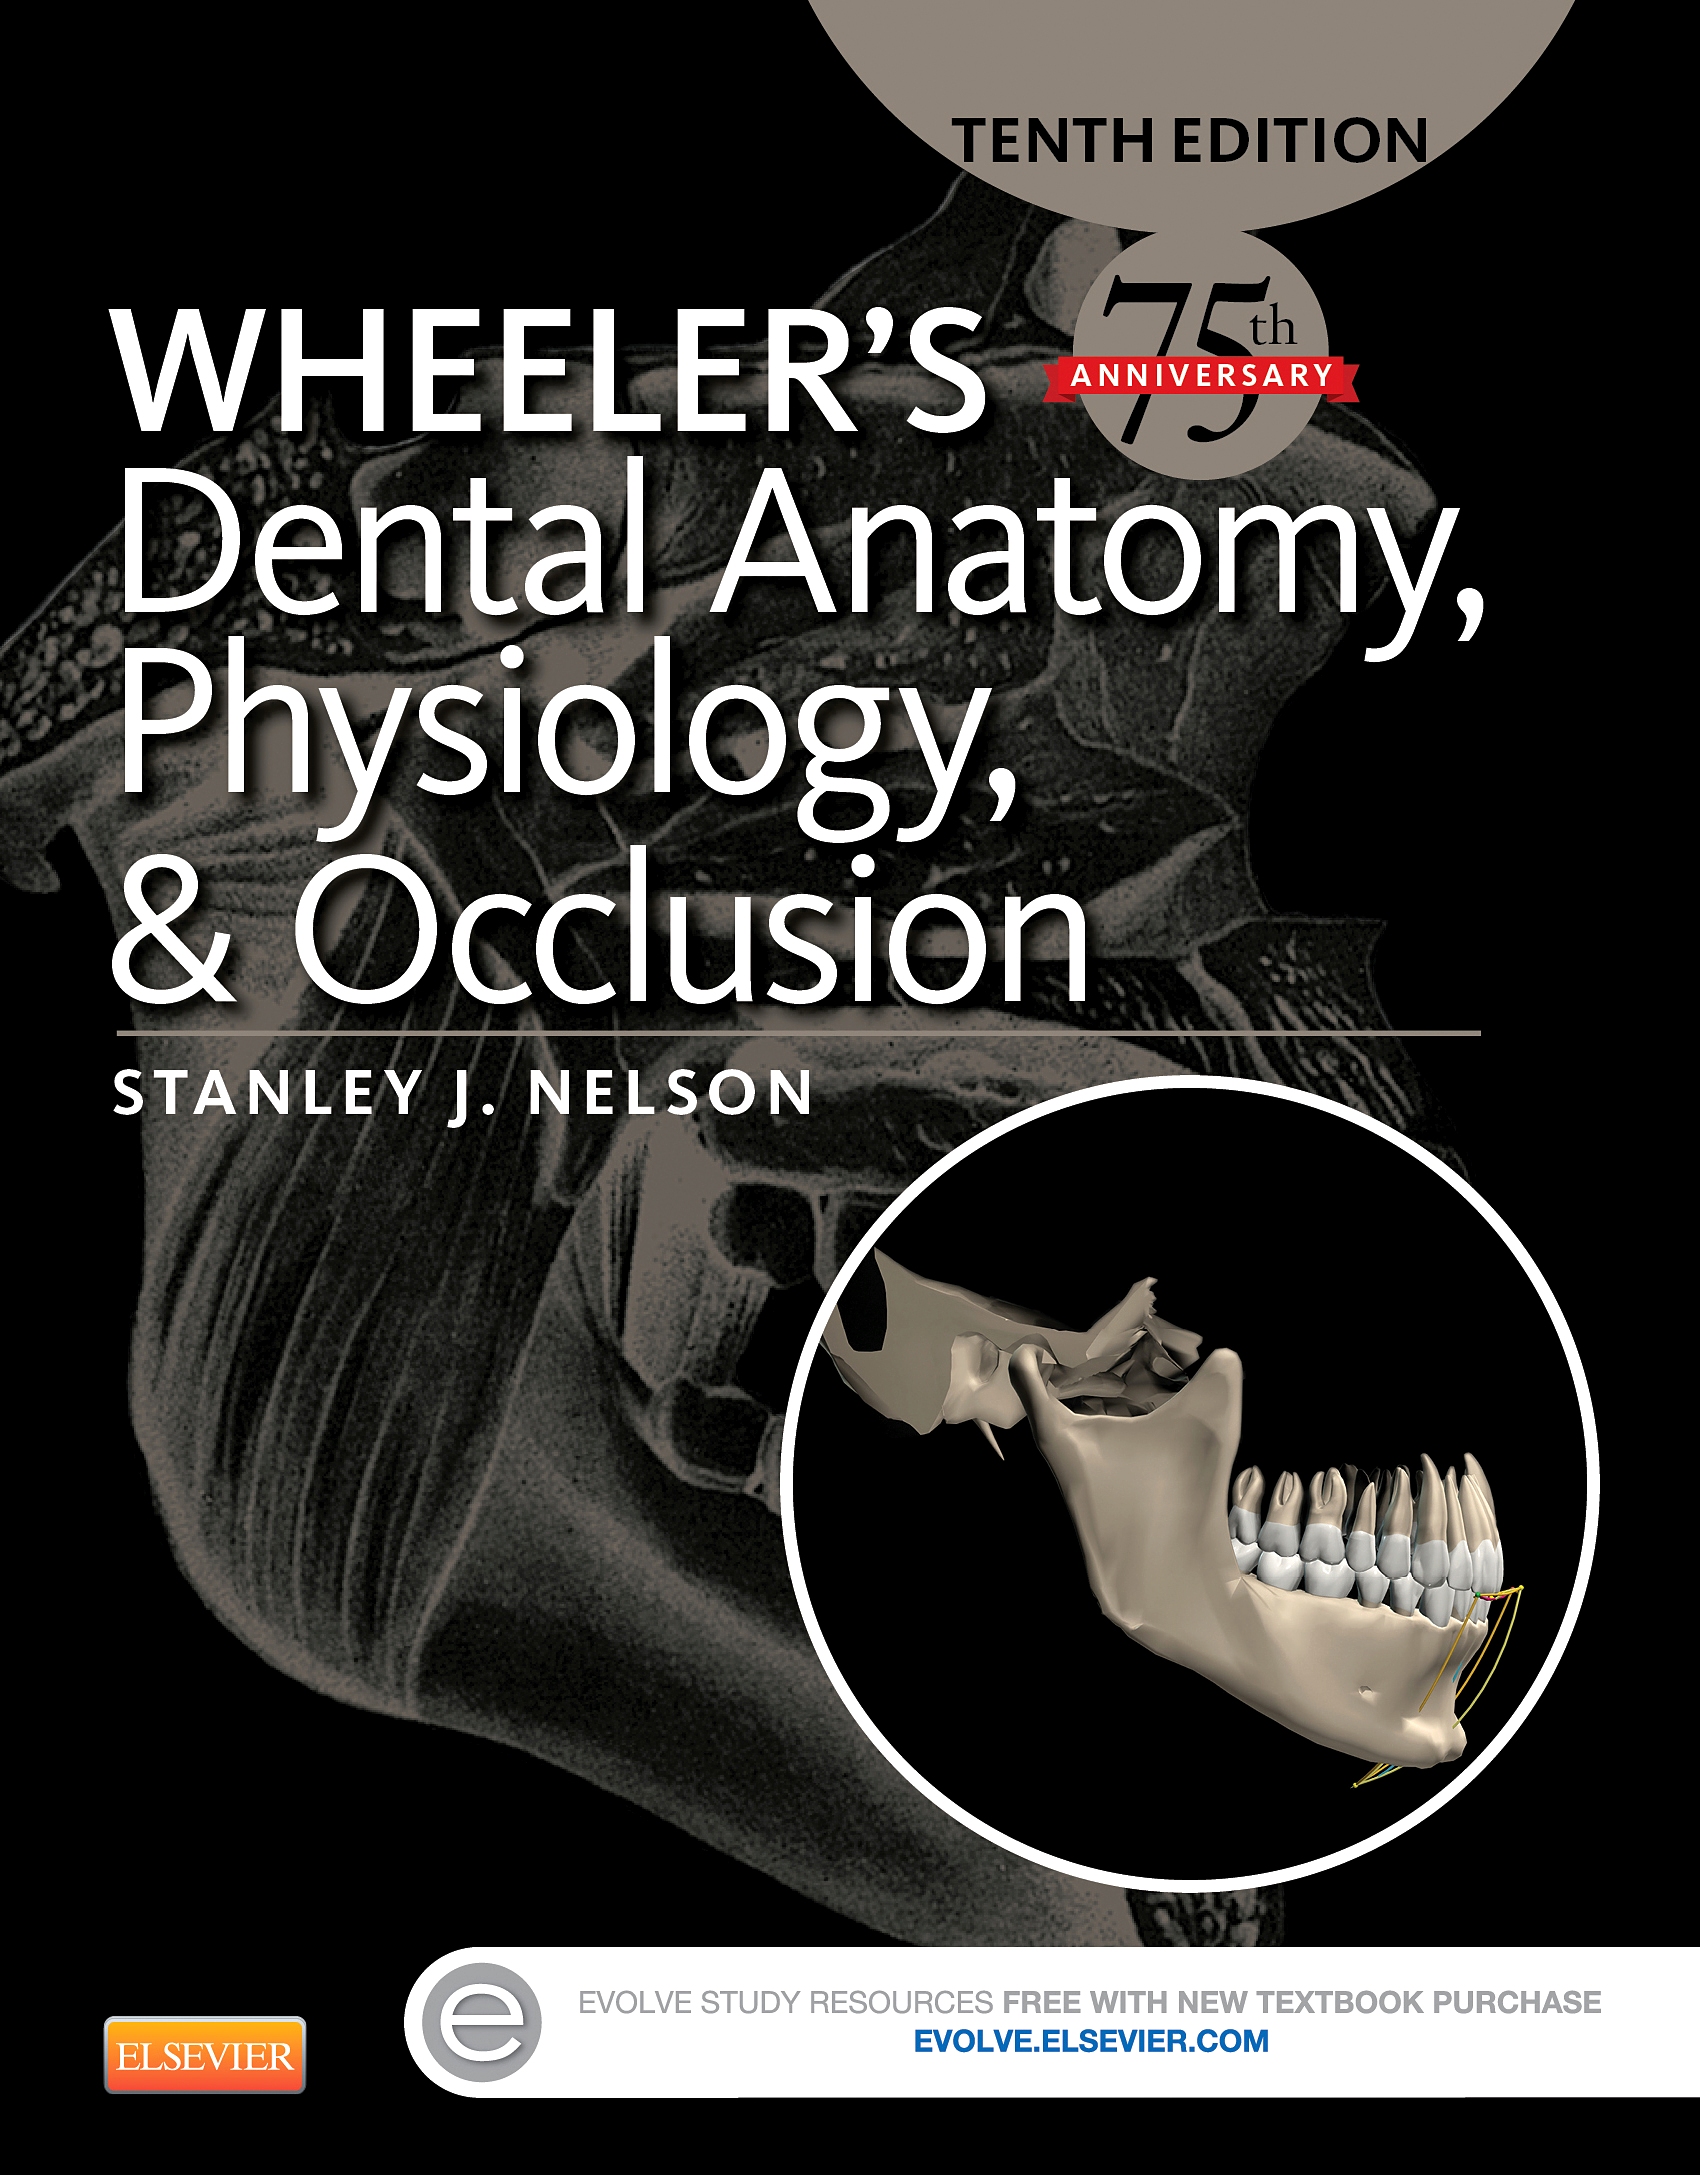 Evolve Resources for Wheeler's Dental Anatomy, Physiology and Occlusion, 10th Edition